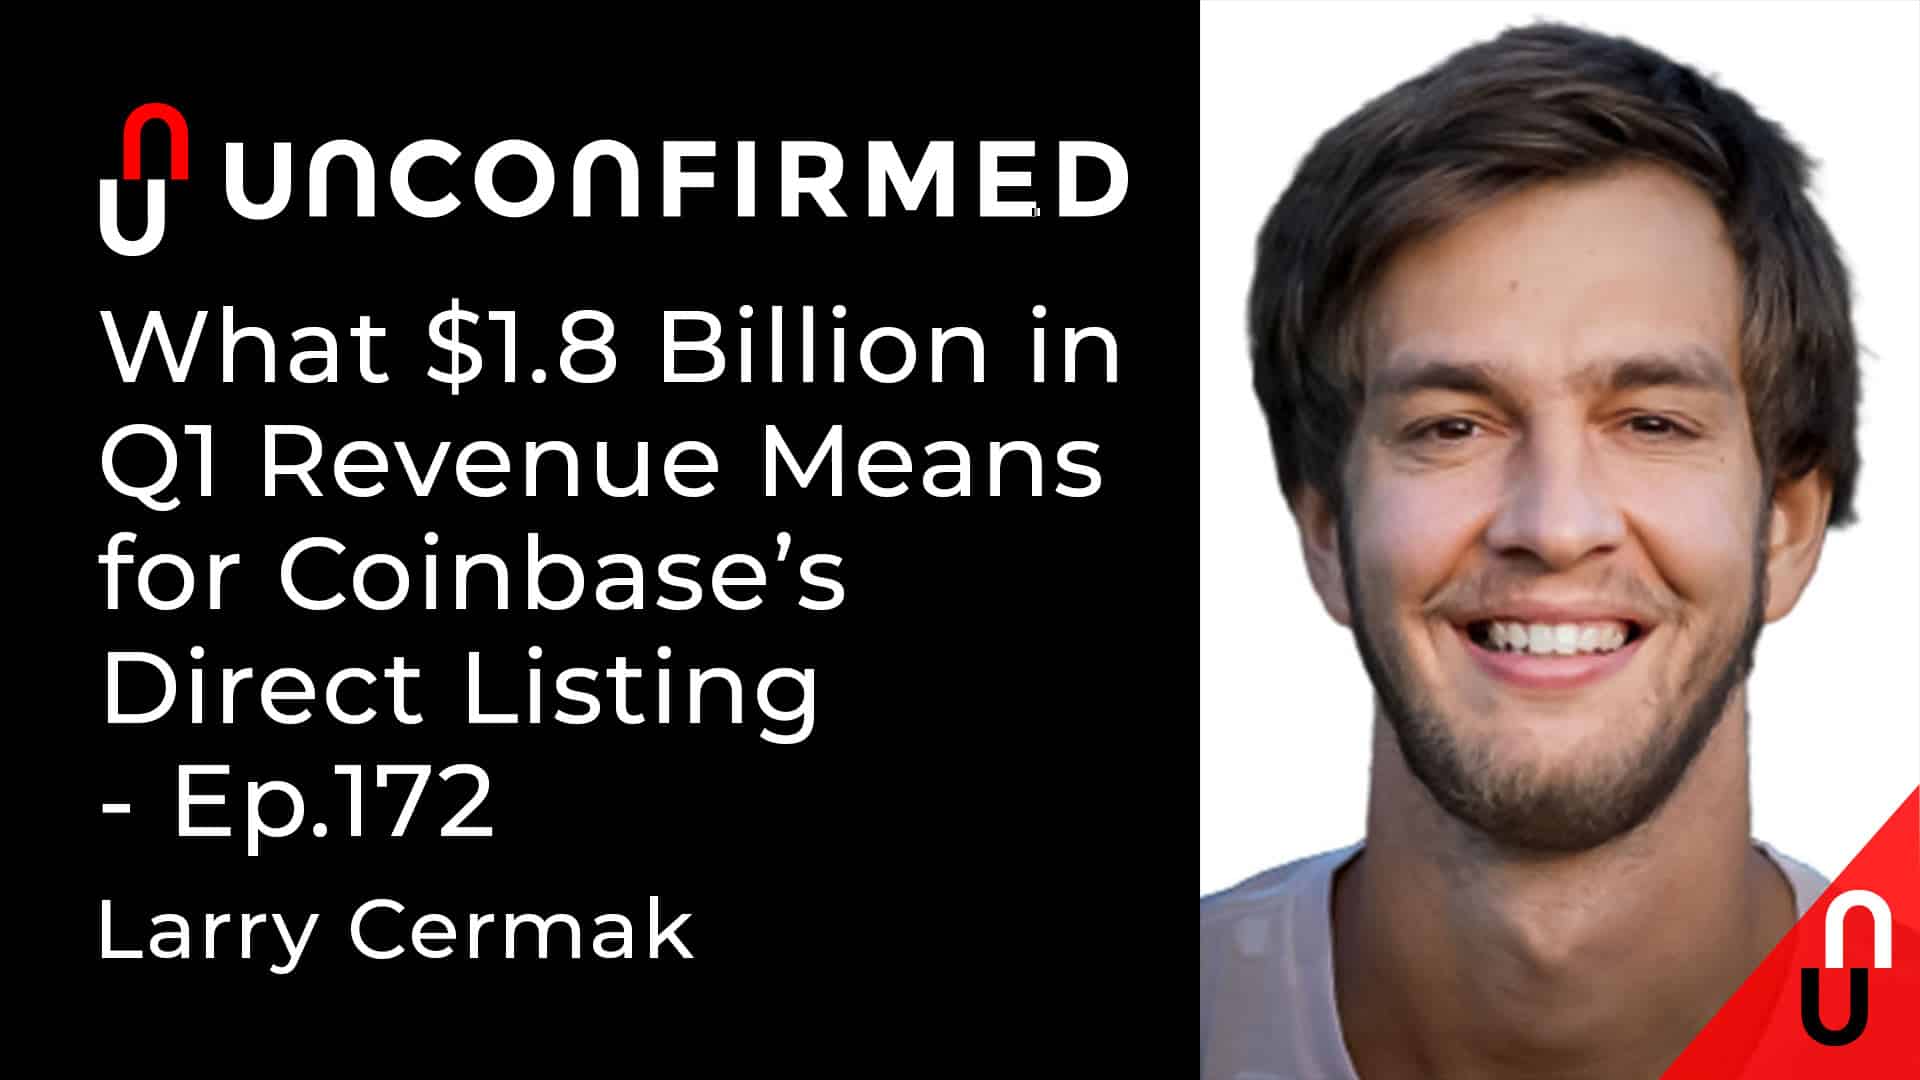 Unconfirmed - Ep.172 - What $1.8 Billion in Q1 Revenue Means for Coinbase’s Direct Listing